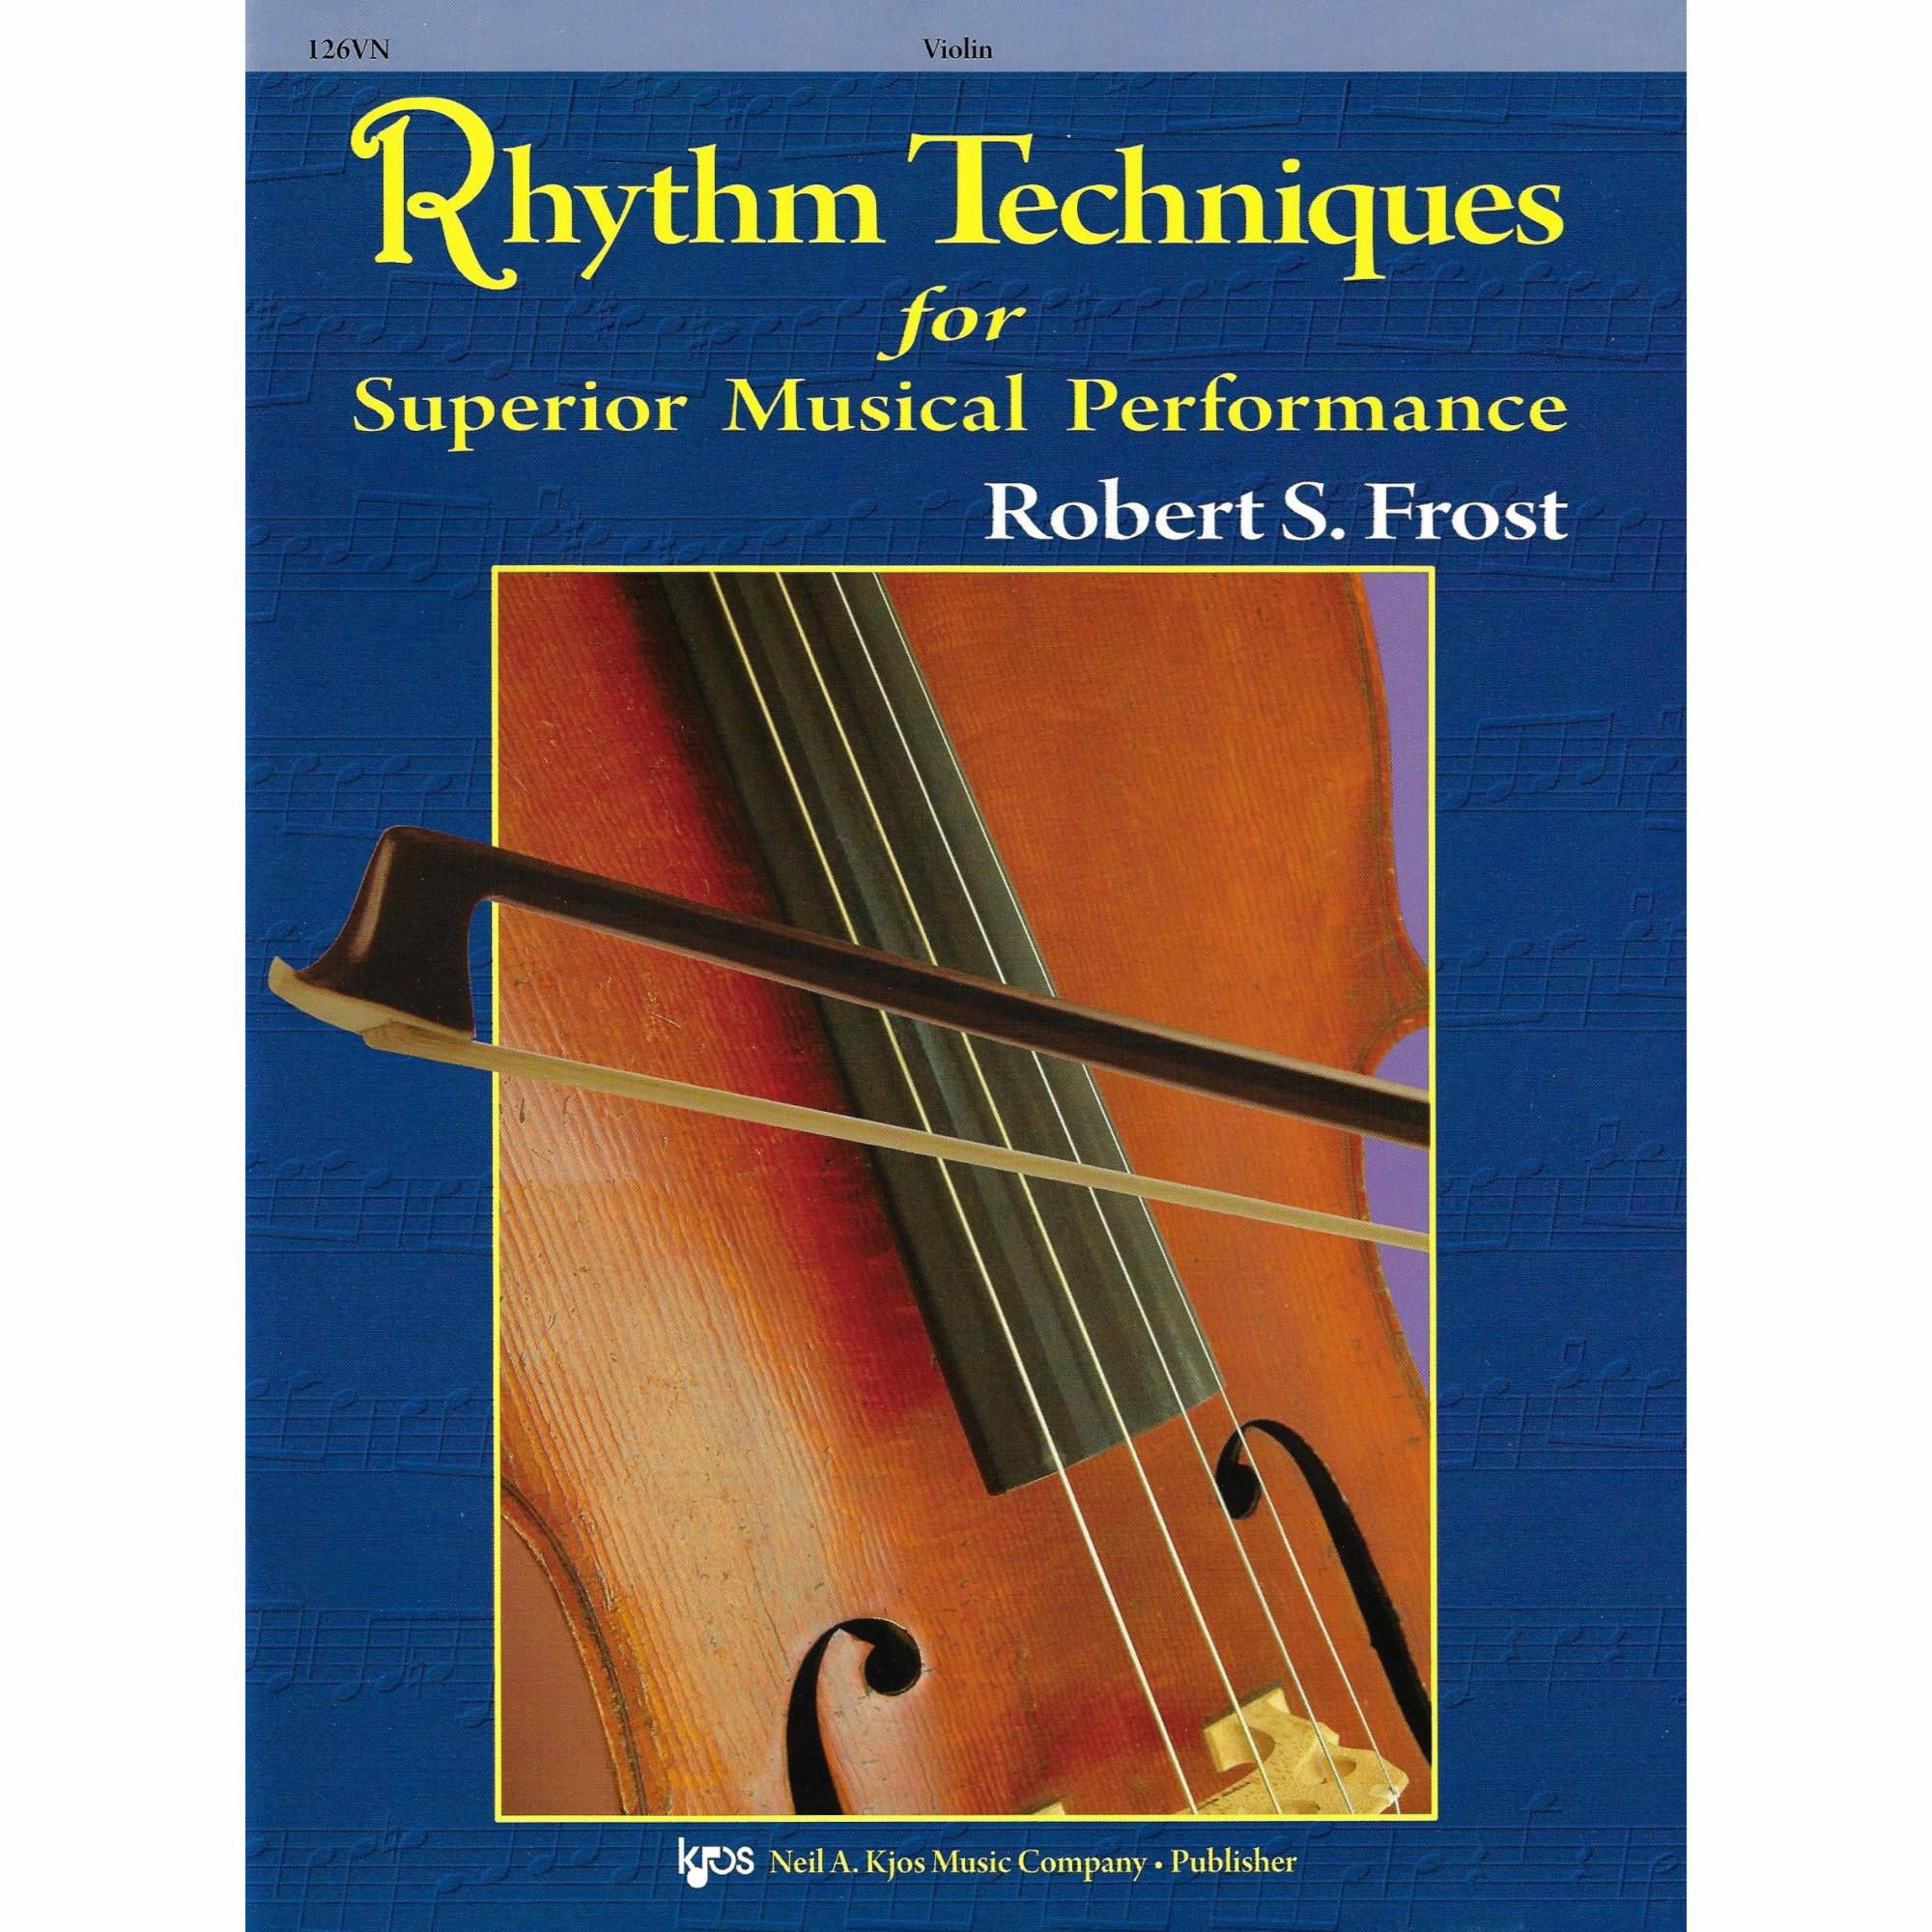 Rhythm Techniques for Superior Musical Performance